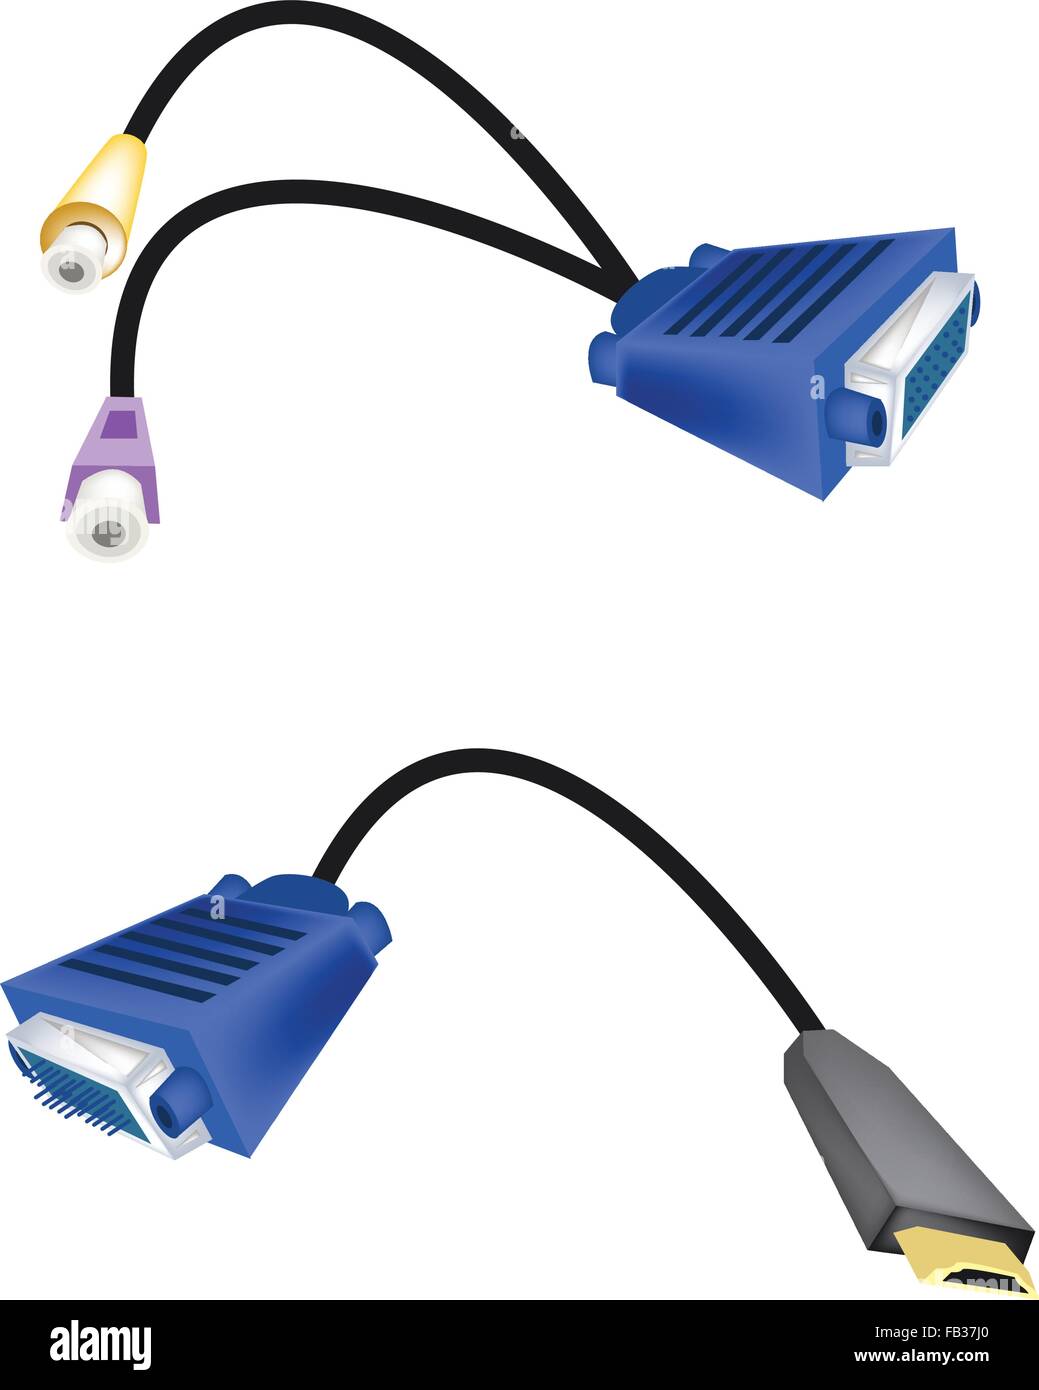 Computer and Technology, Illustration of VGA Monitor Cables or DVI Digital Video Interface to RCA and HDMI Cables  For Computer Stock Vector